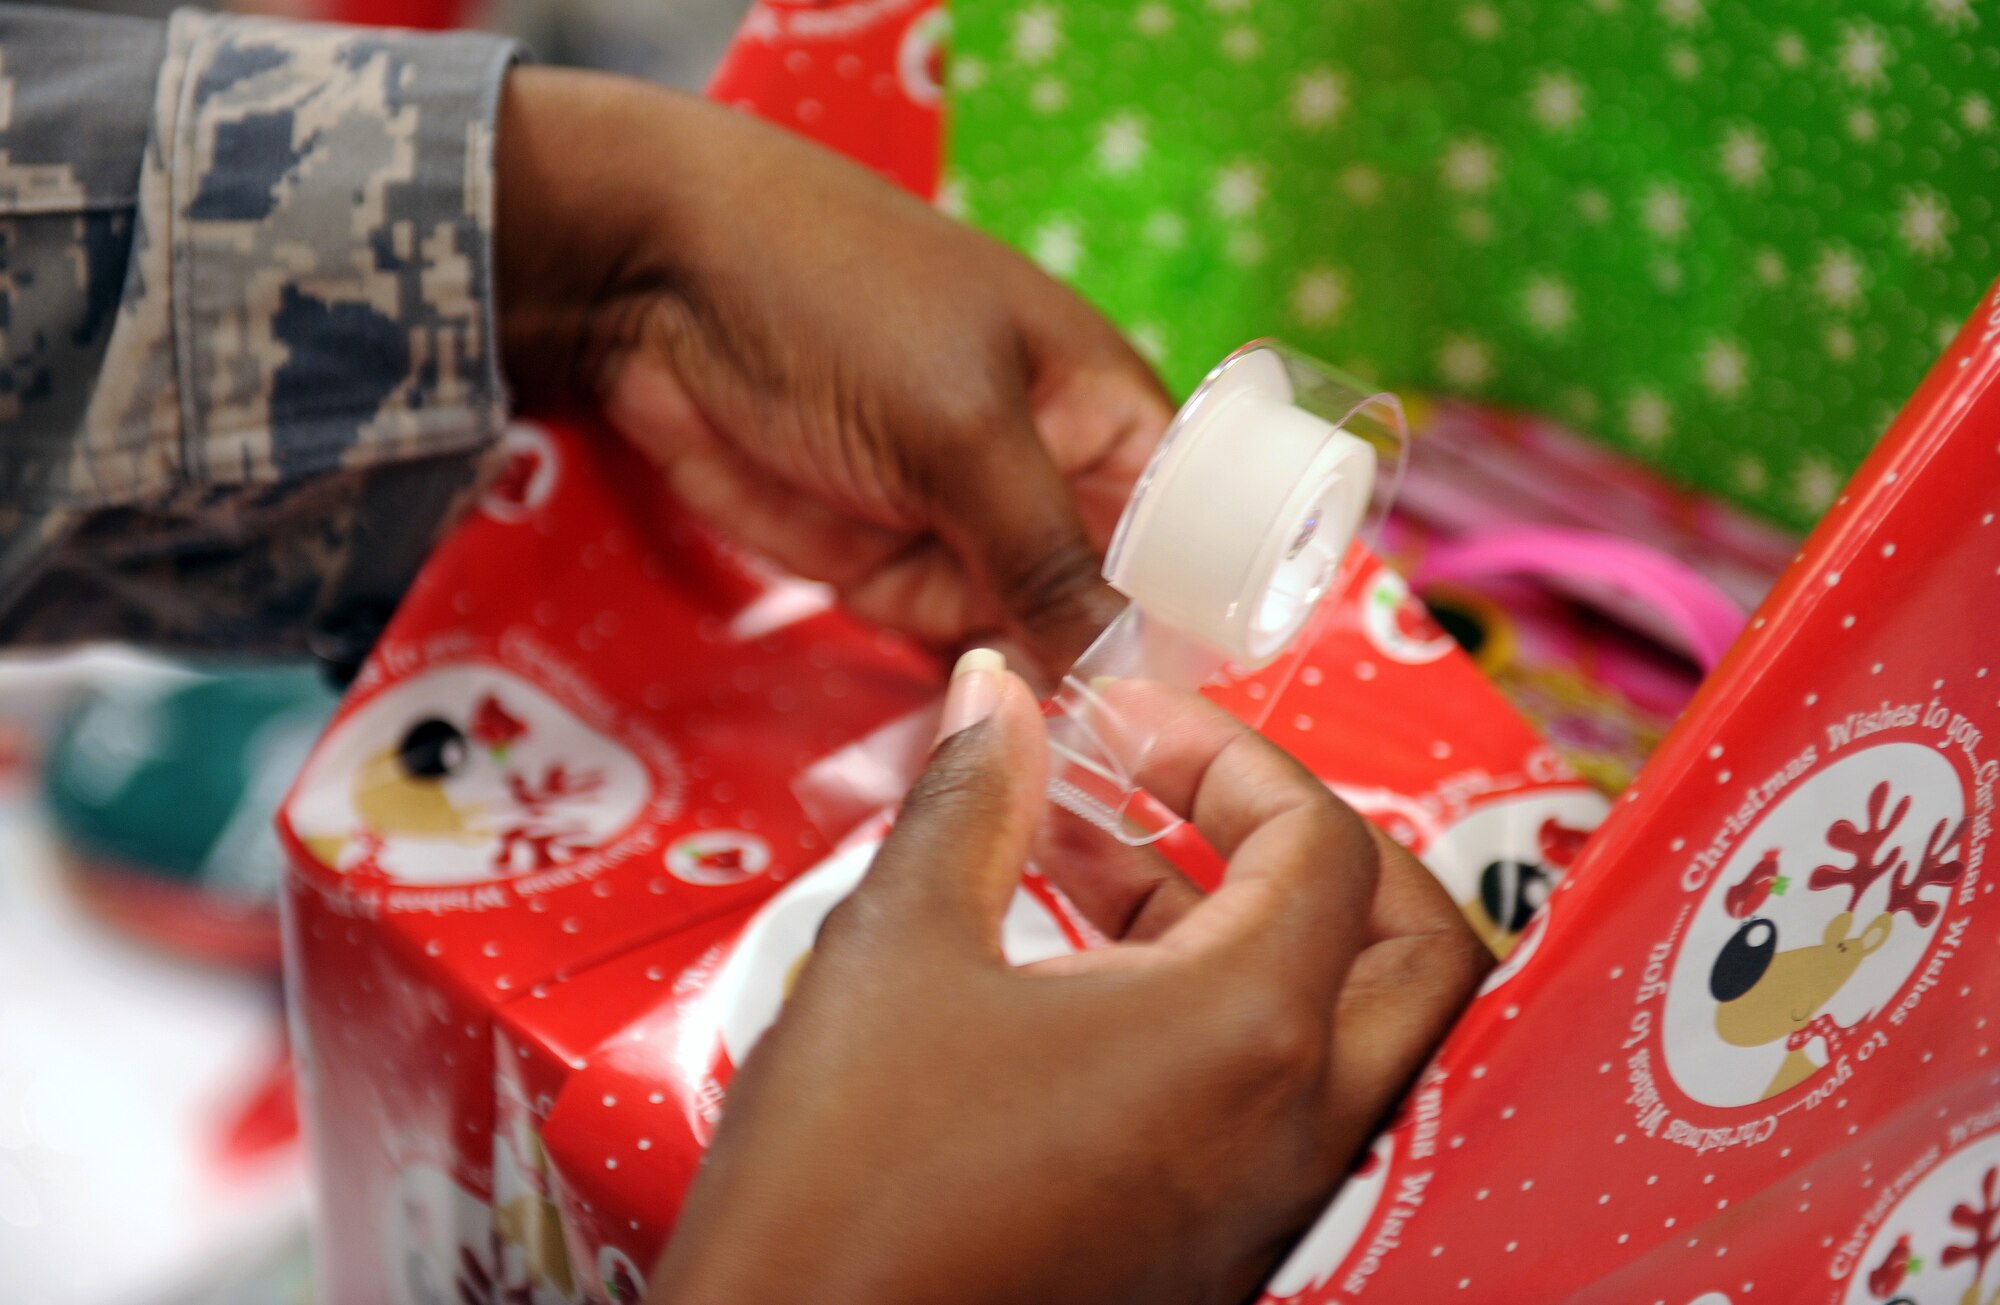 MOODY AIR FORCE BASE, Ga. -- Senior Airman Stacey Jeffrey, 23rd Mission Support Group knowledge operator, puts the finishing touches on a wrapped gift for a little girl during the Adopt-a-Family event at the Chapel Dec. 18 here. All Airmen and civilians that supported the event volunteered their time to help the underprivileged during this holiday season. (U.S. Air Force photo by Airman Joshua Green)